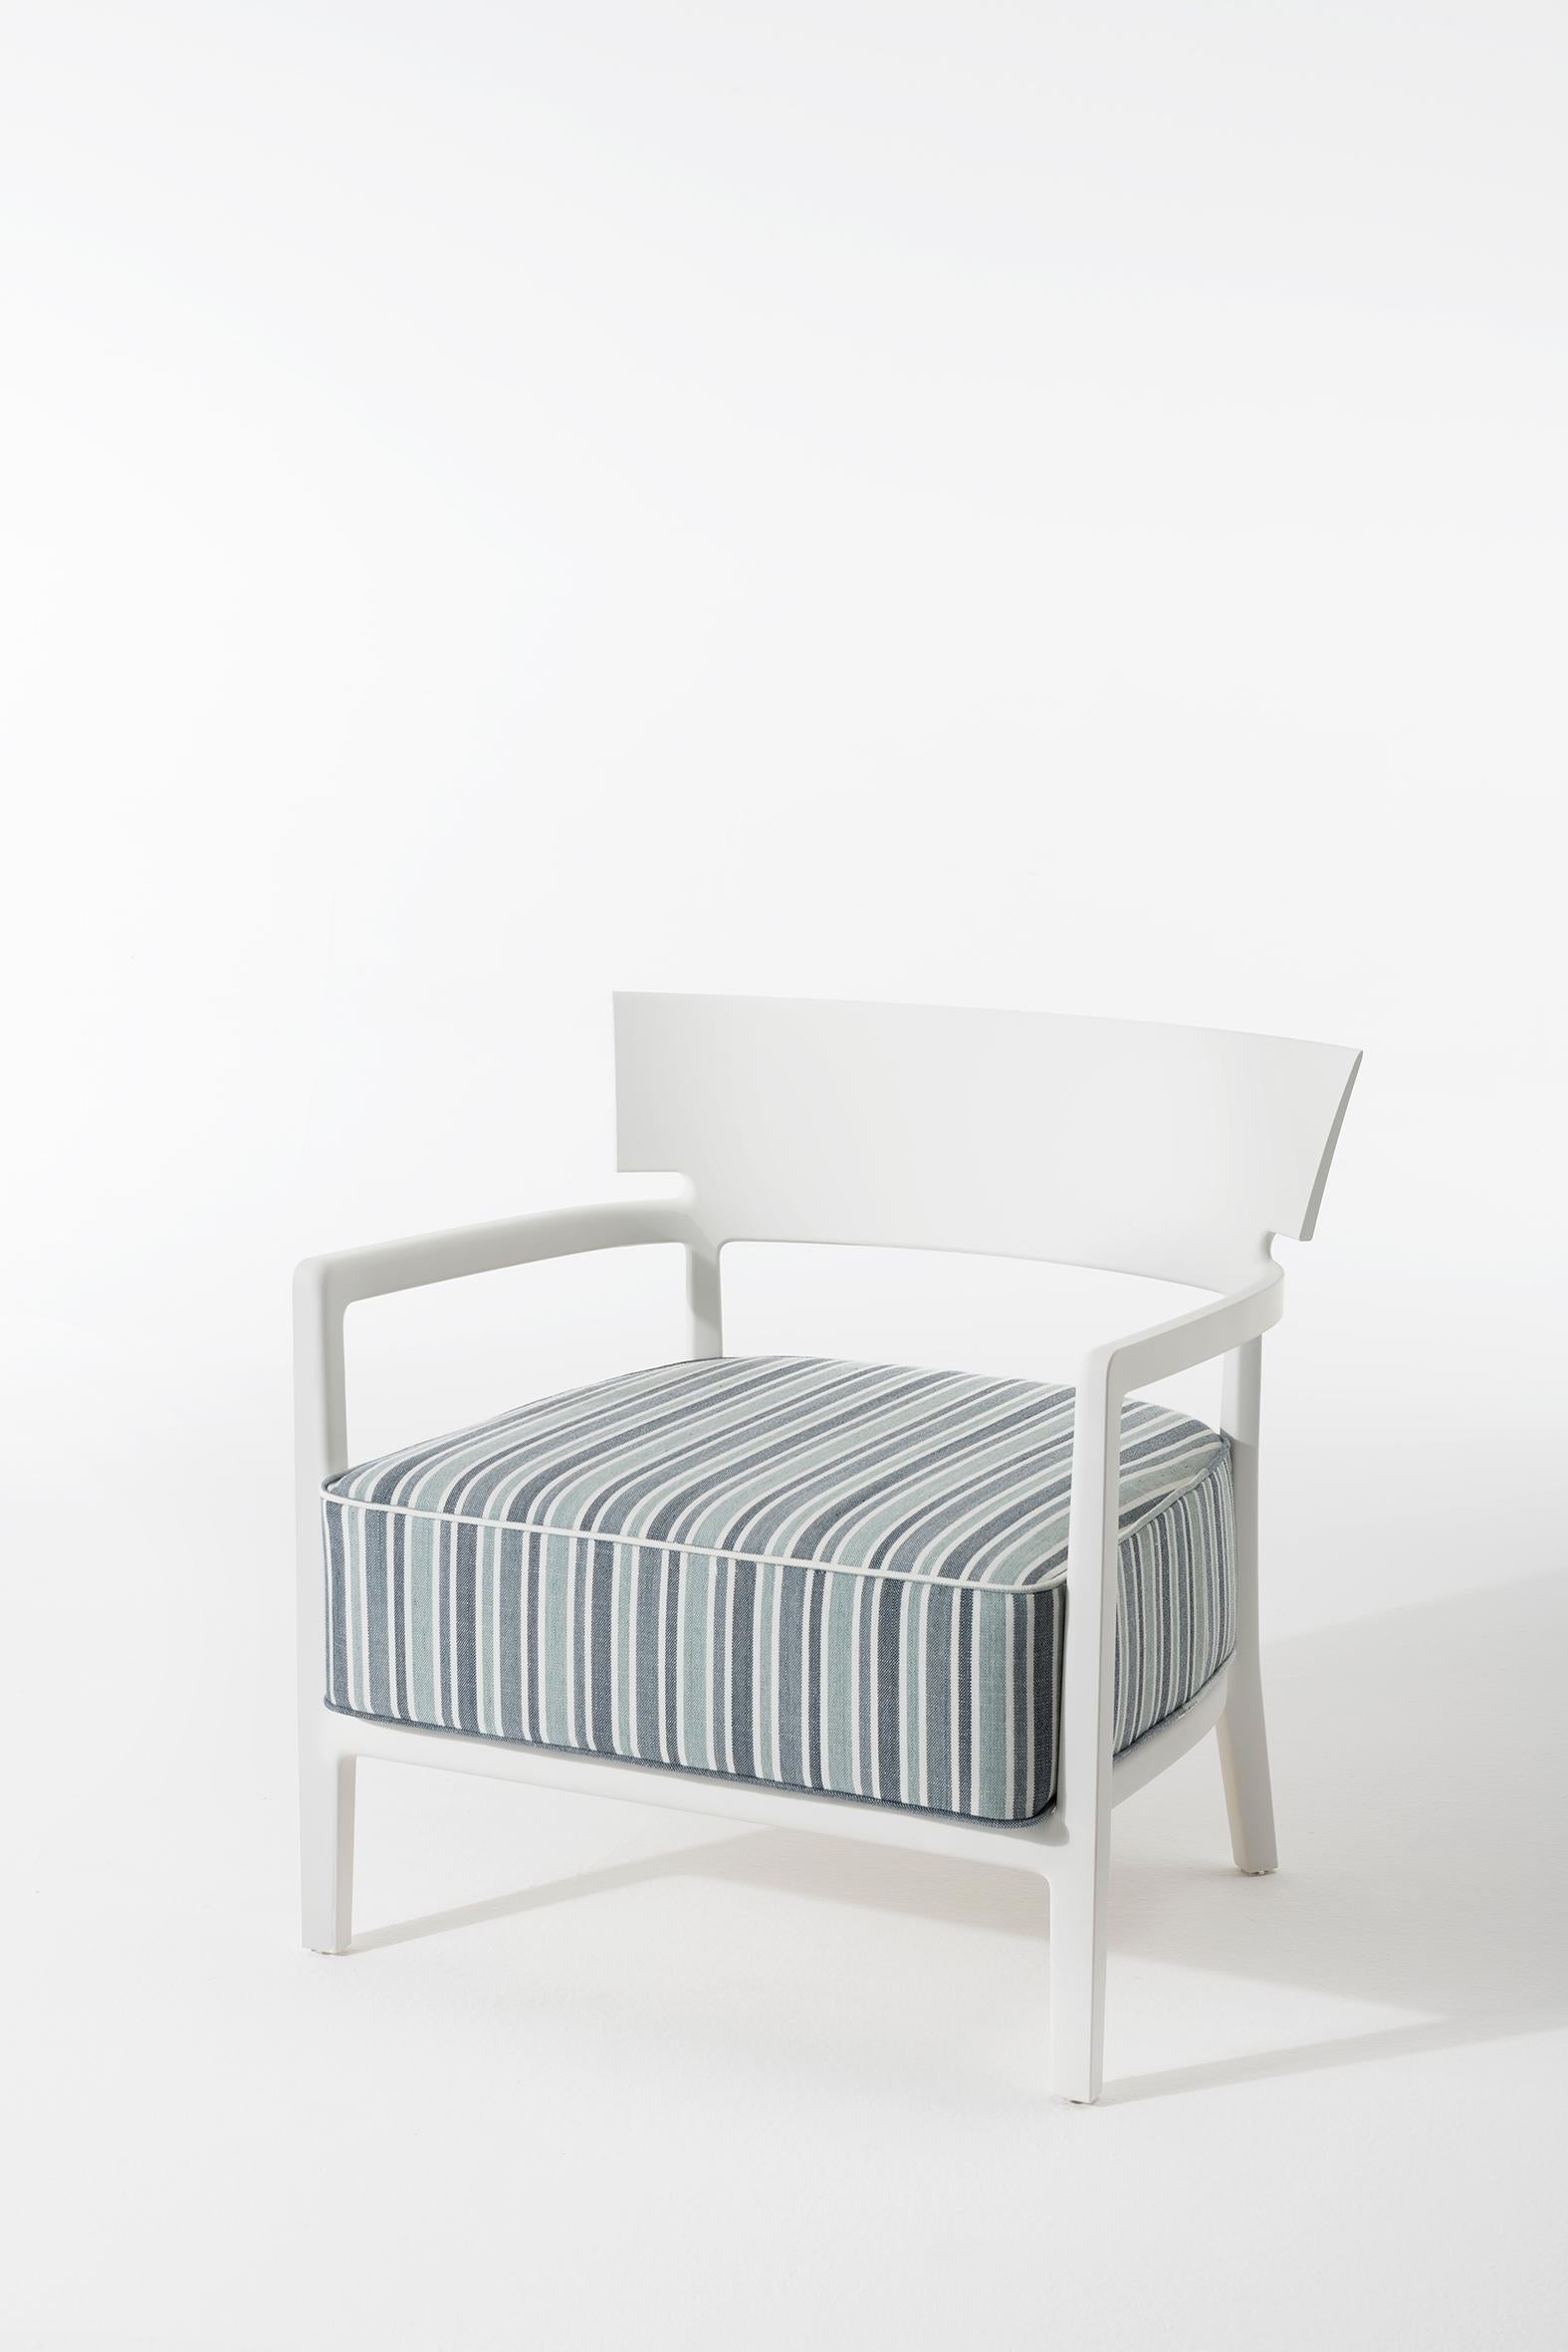 Italian Kartell Cara Mat Outdoor Chair in Dove Grey by Philippe Starck & Sergio Schito For Sale